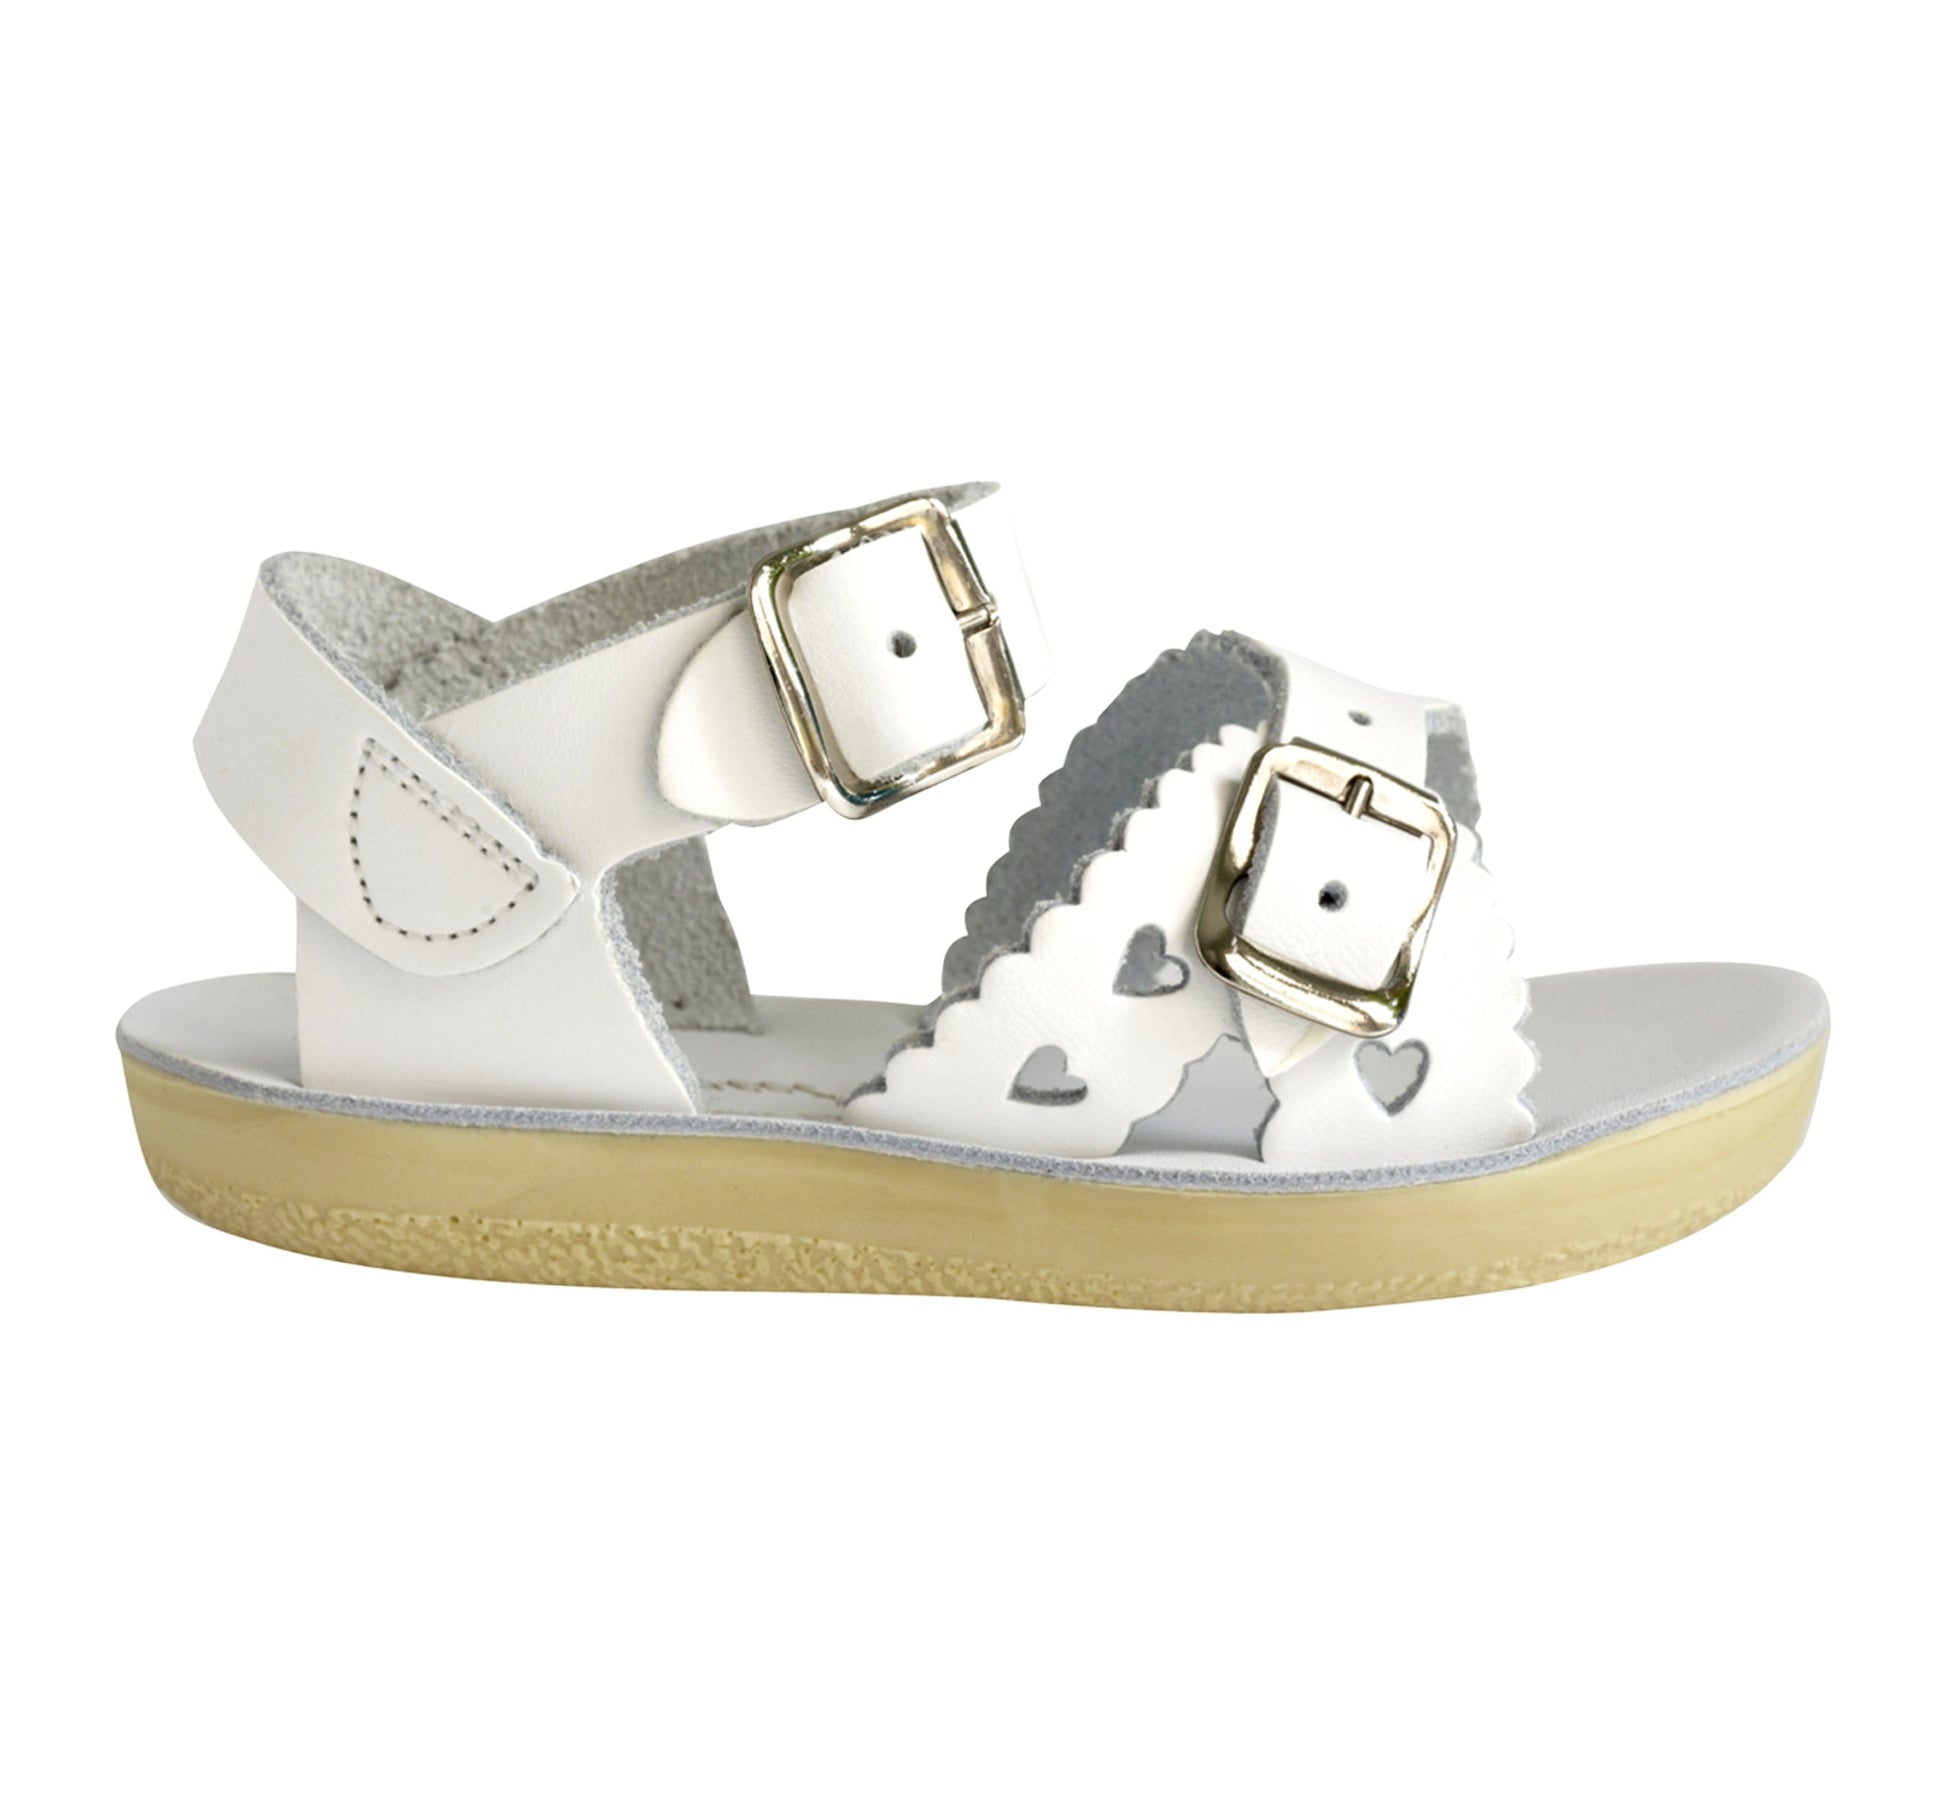 A girls sandal by Salt Water Sandal in white with double buckle fastening across the instep and around the ankle. Featuring scallop edge and punched out heart detail. Right Sideview.